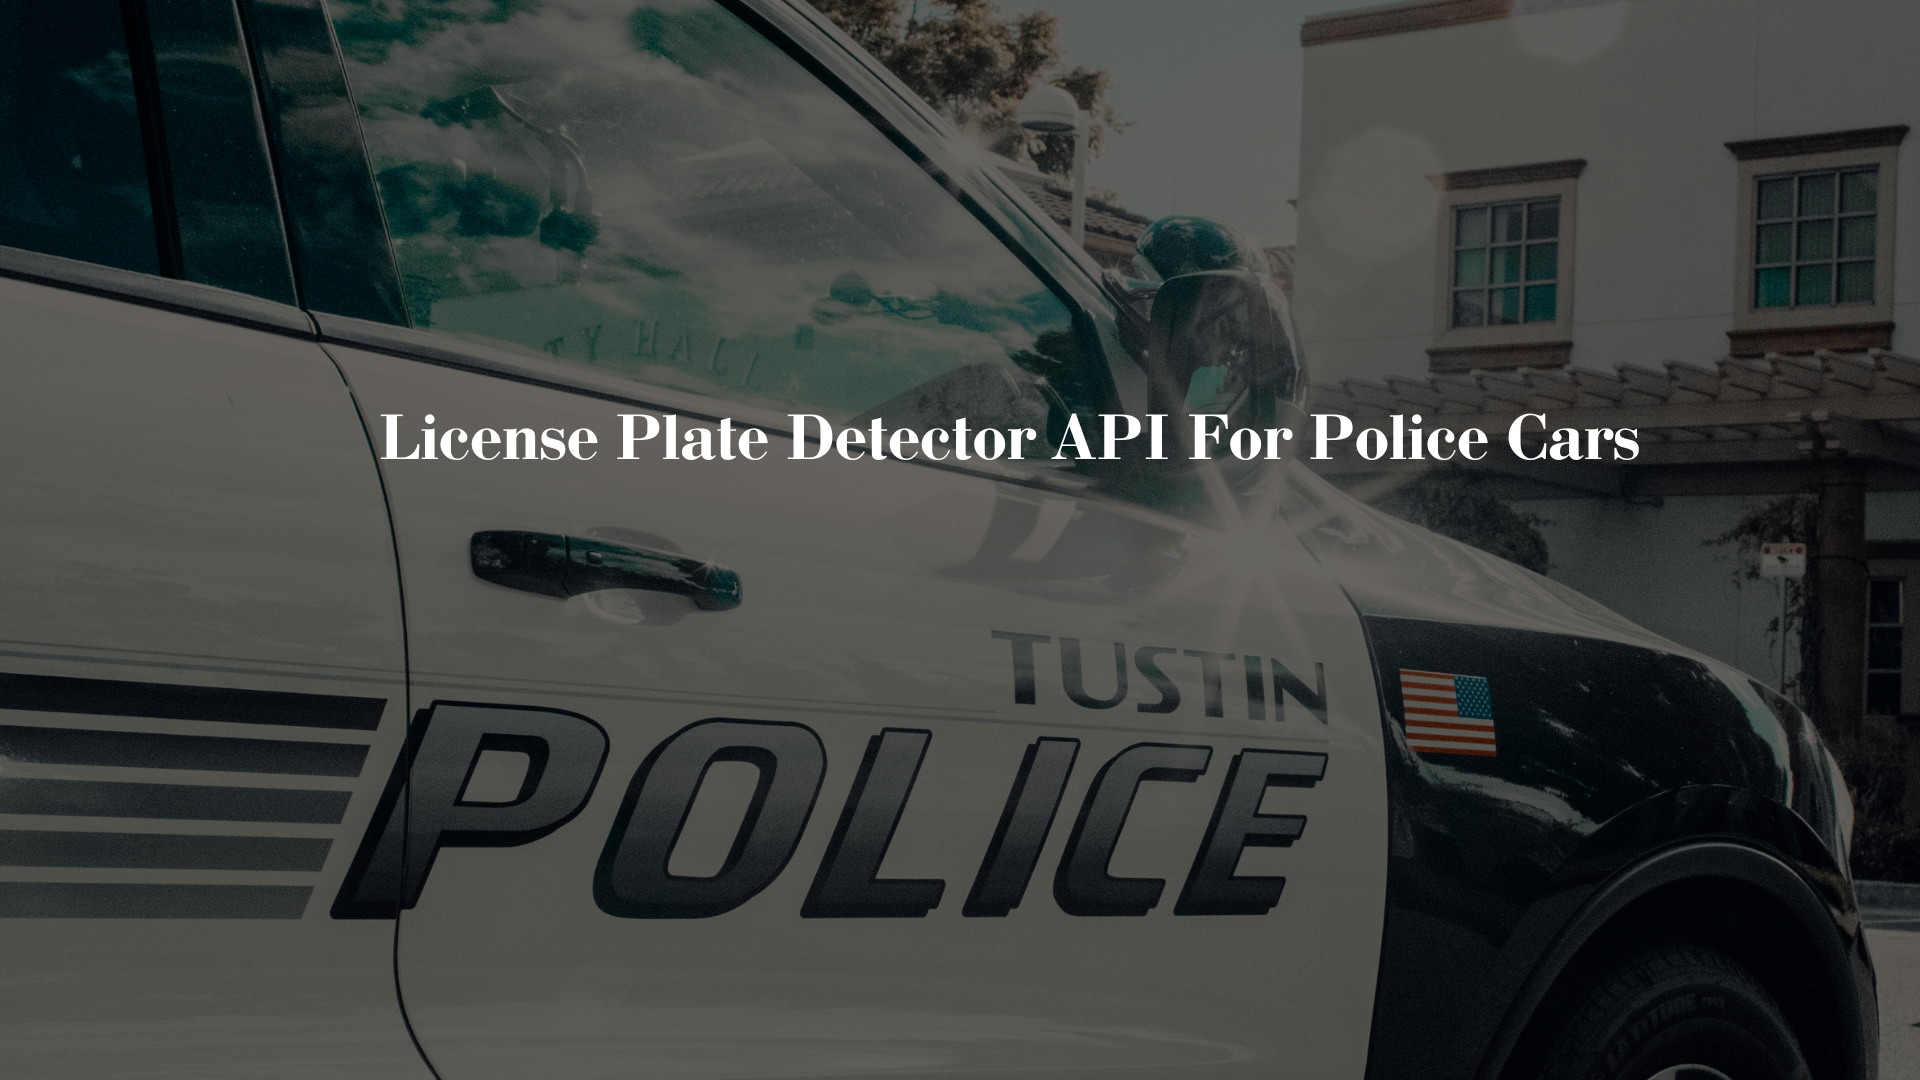 License Plate Detector API For Police Cars